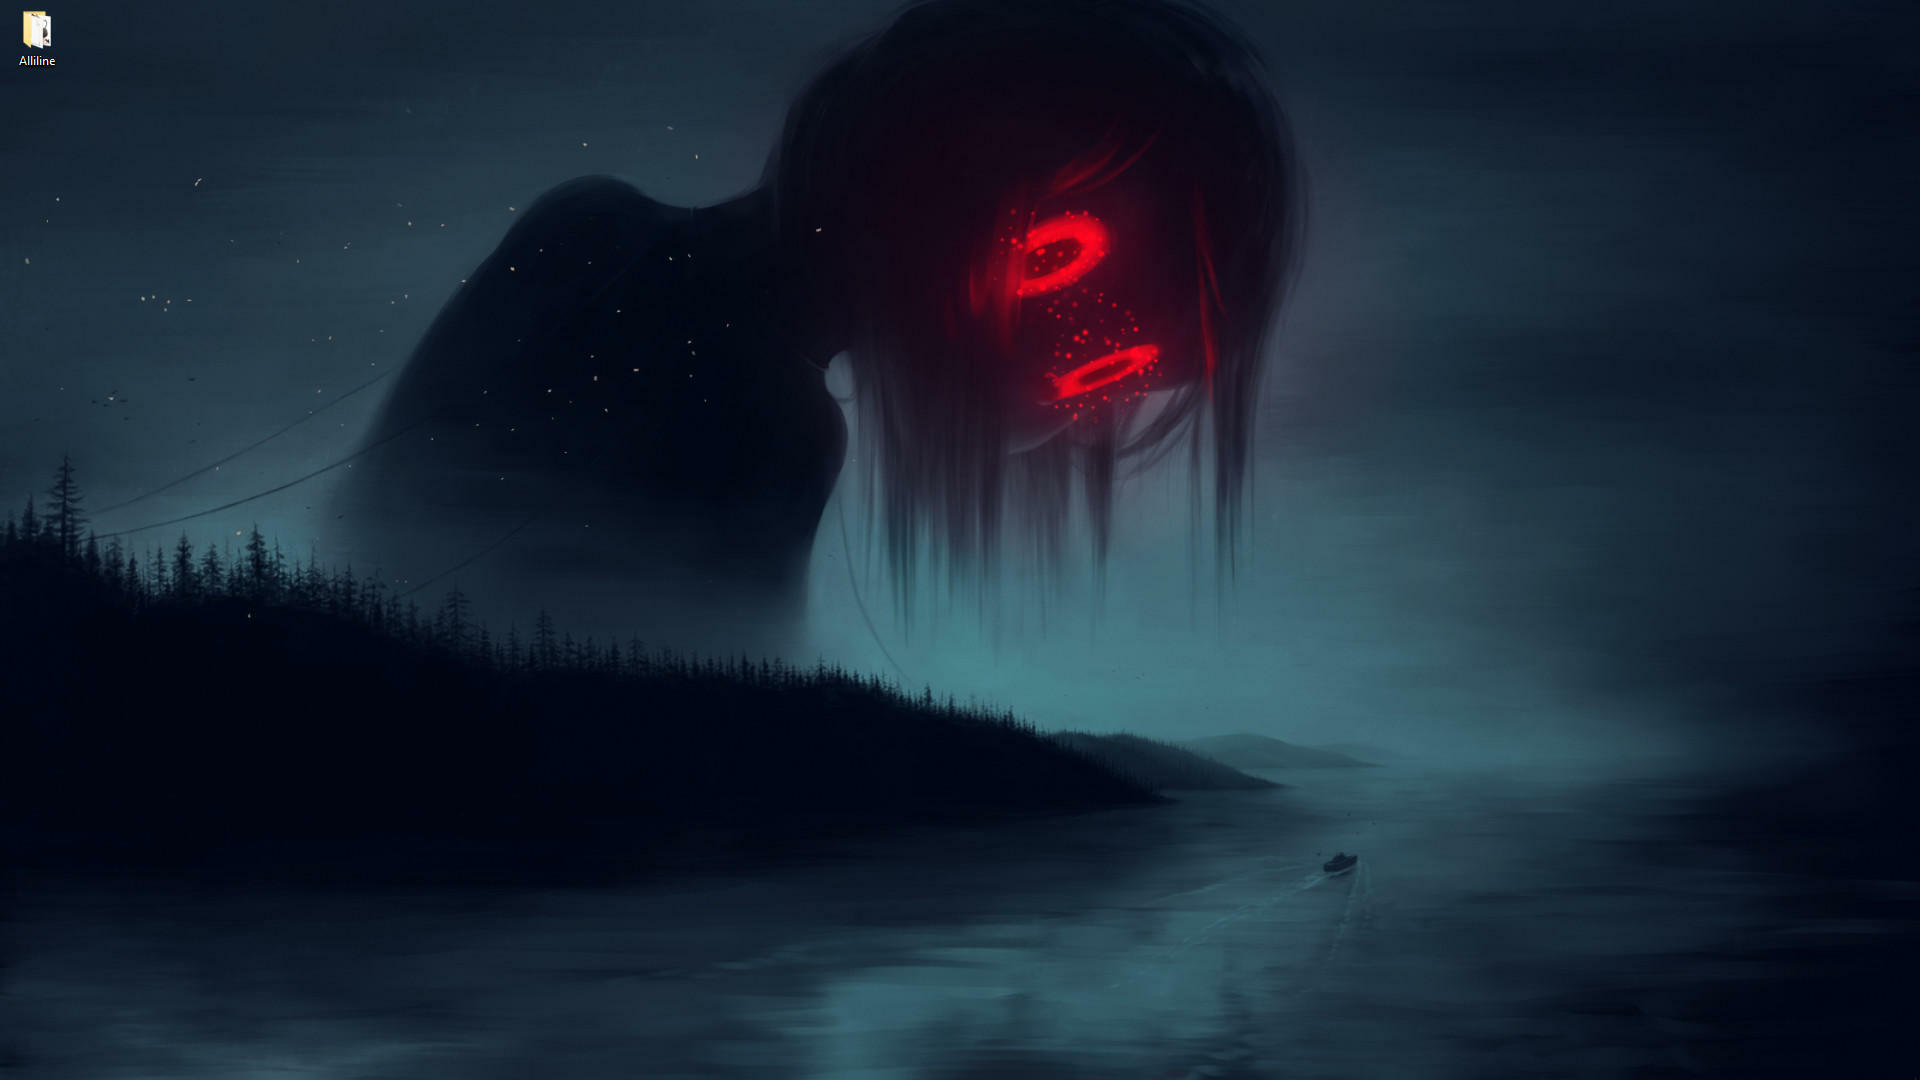 Red Eyed Monster Girl Looks Down On The Boat Live Wallpaper [DOWNLOAD FREE]